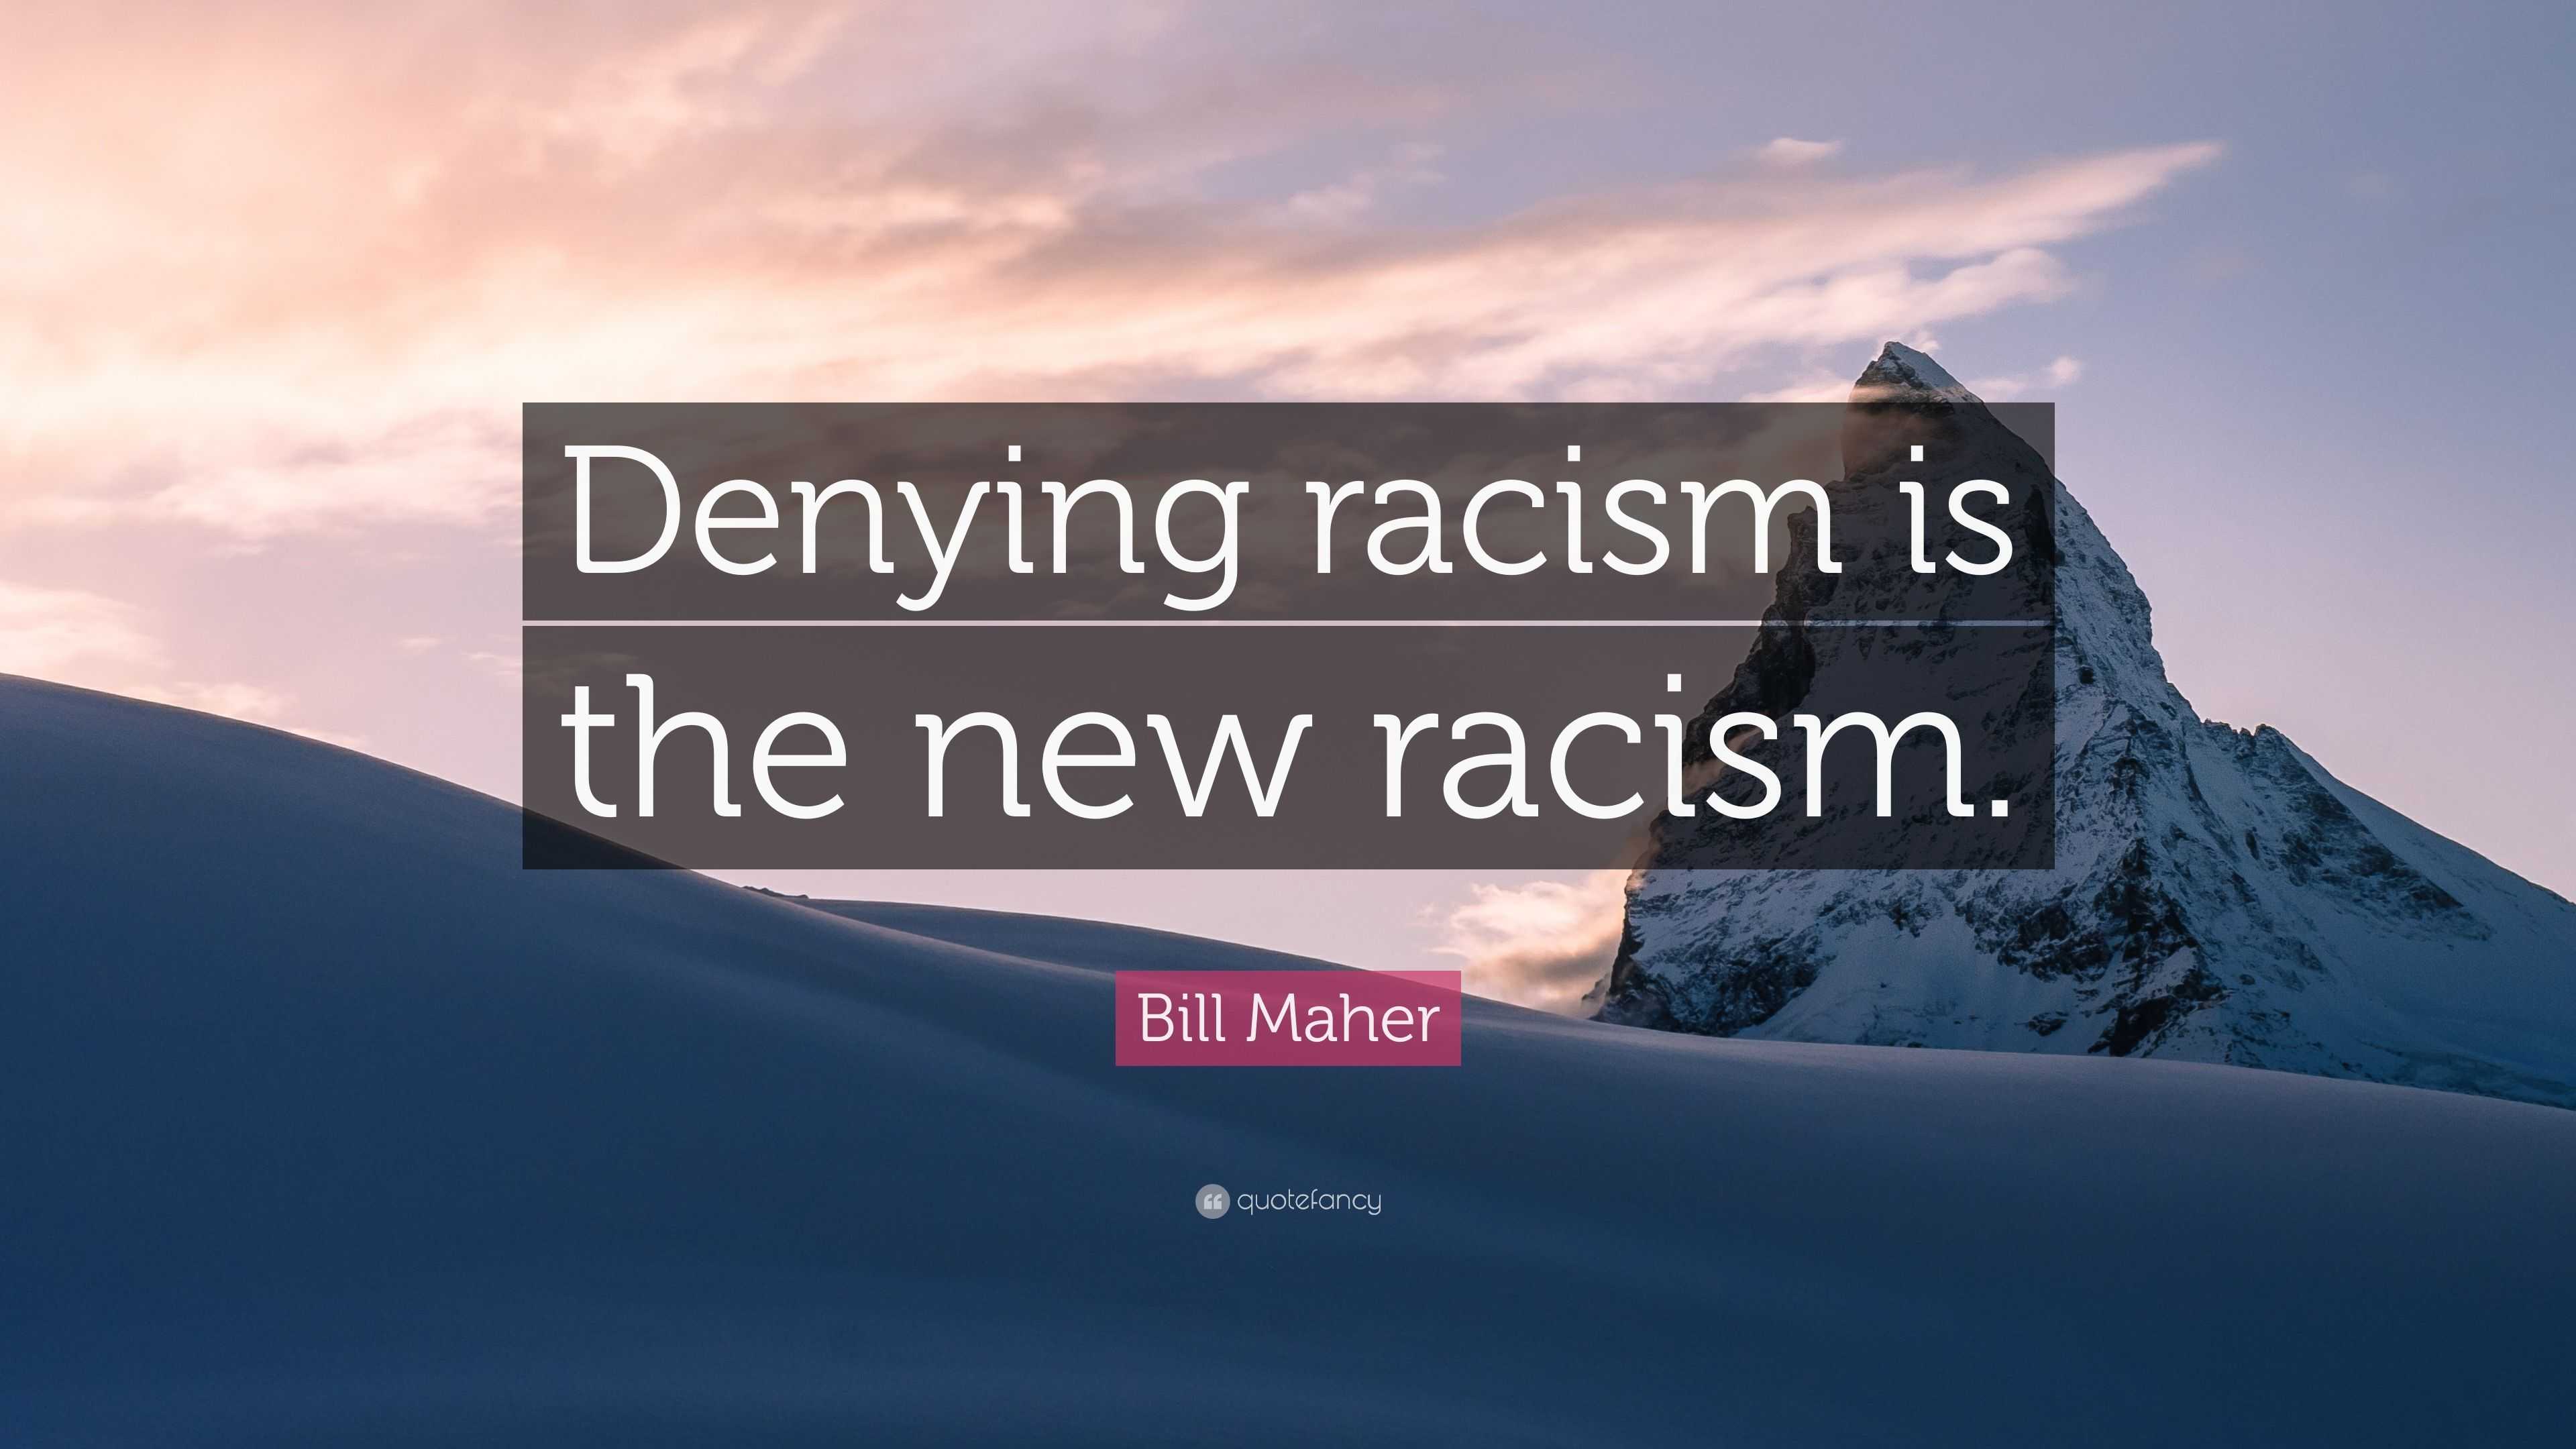 Bill Maher Quote: “Denying racism is the new racism.”